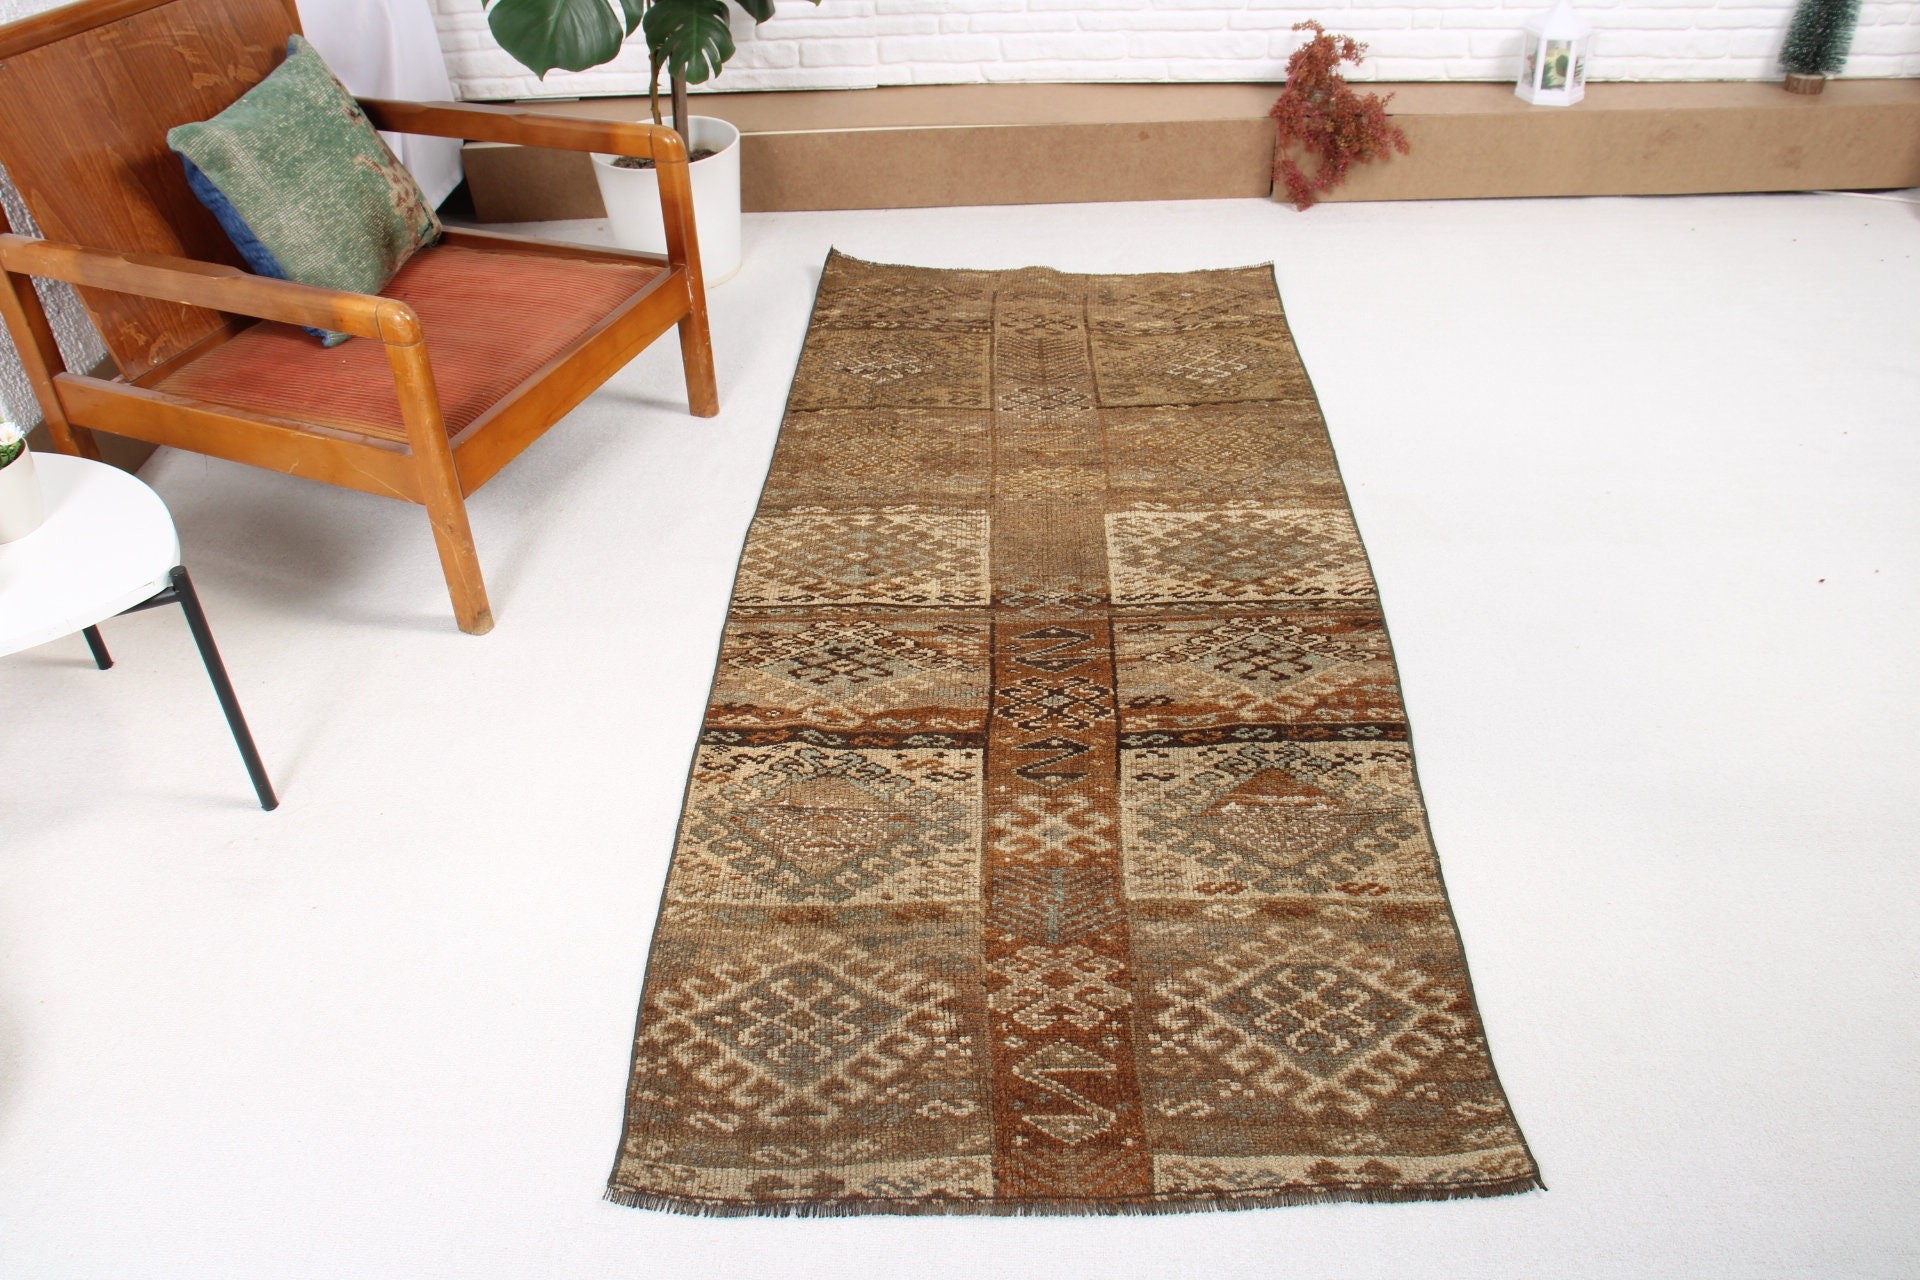 Turkish Rug, Kitchen Rug, Vintage Rugs, 2.8x6.5 ft Accent Rug, Brown Wool Rugs, Rugs for Kitchen, Home Decor Rug, Entry Rug